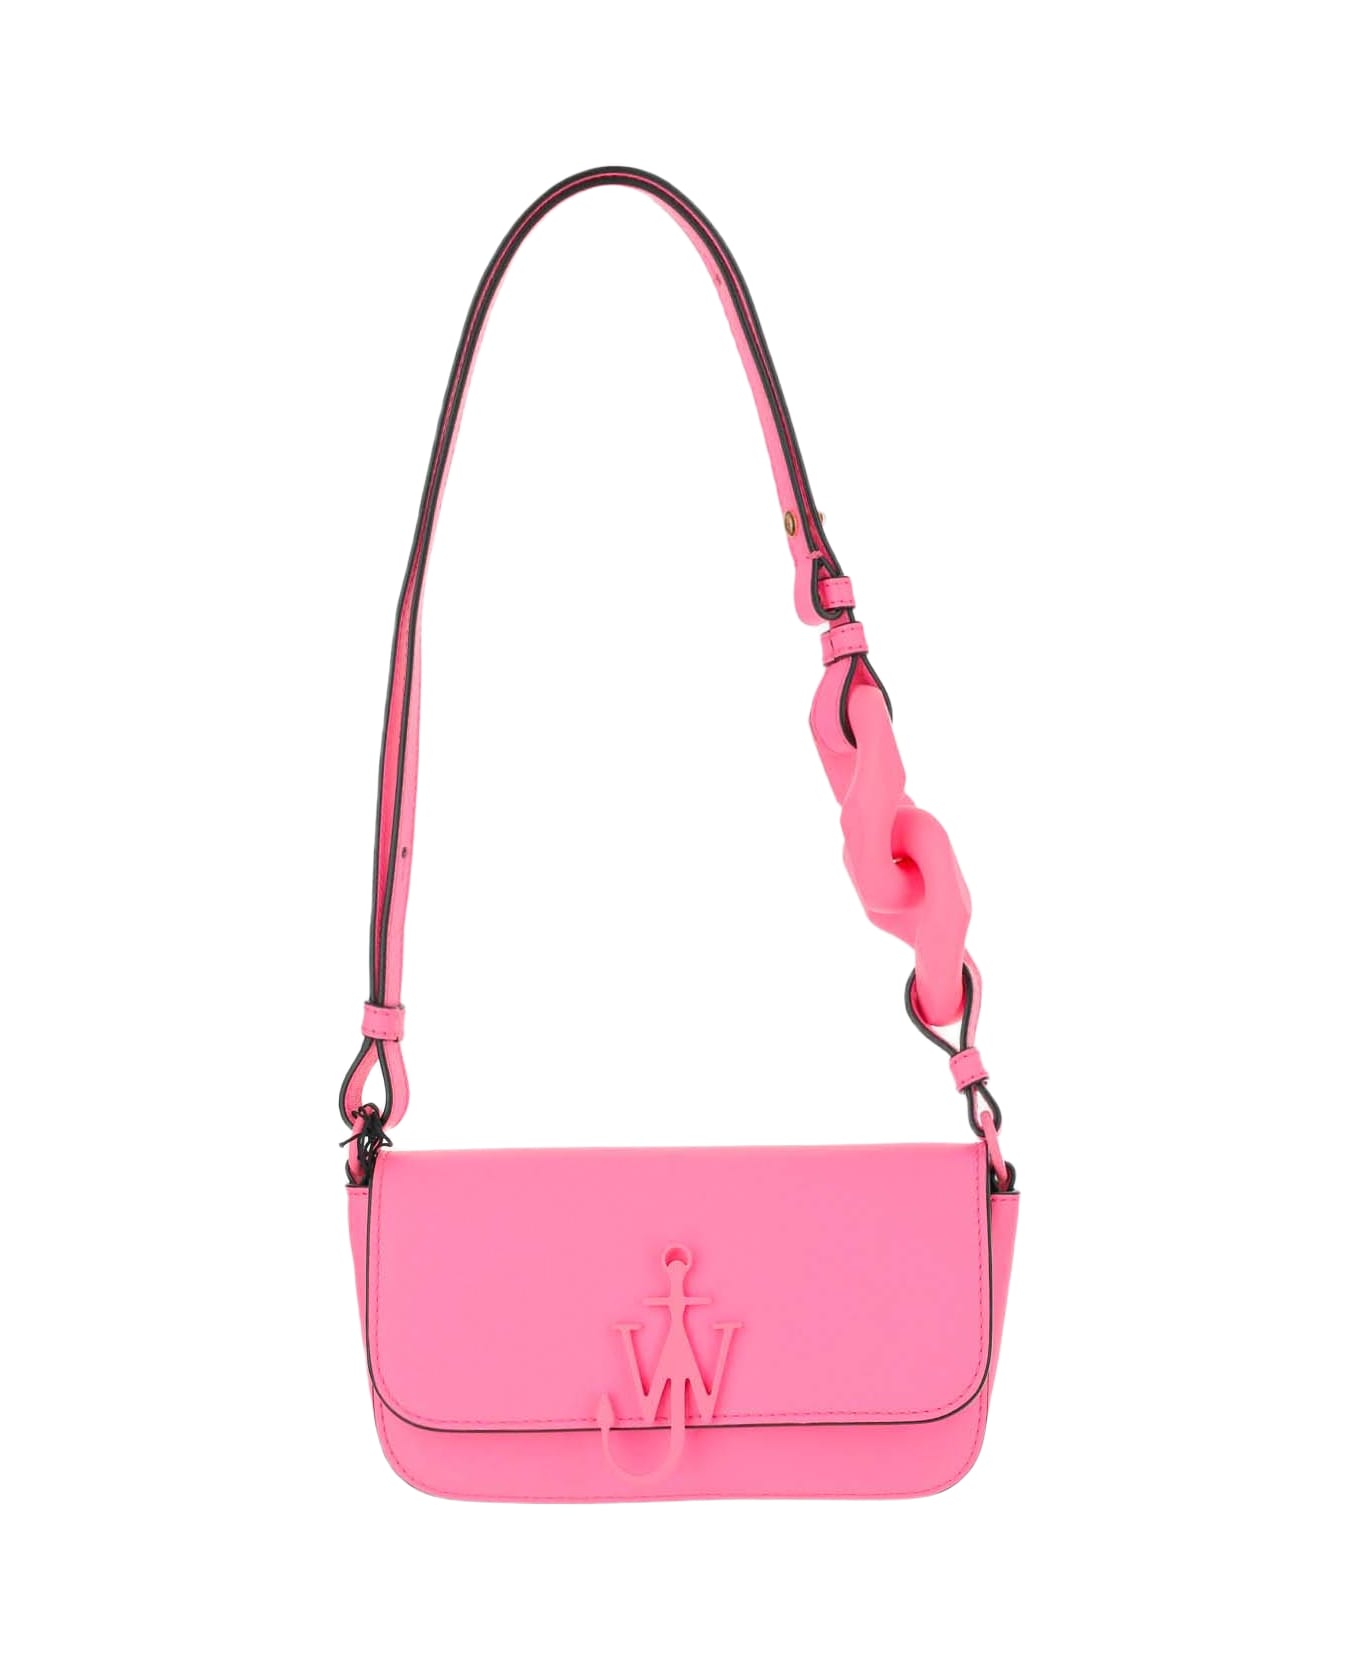 J.W. Anderson Anchor Chain Baguette Bag - Pink